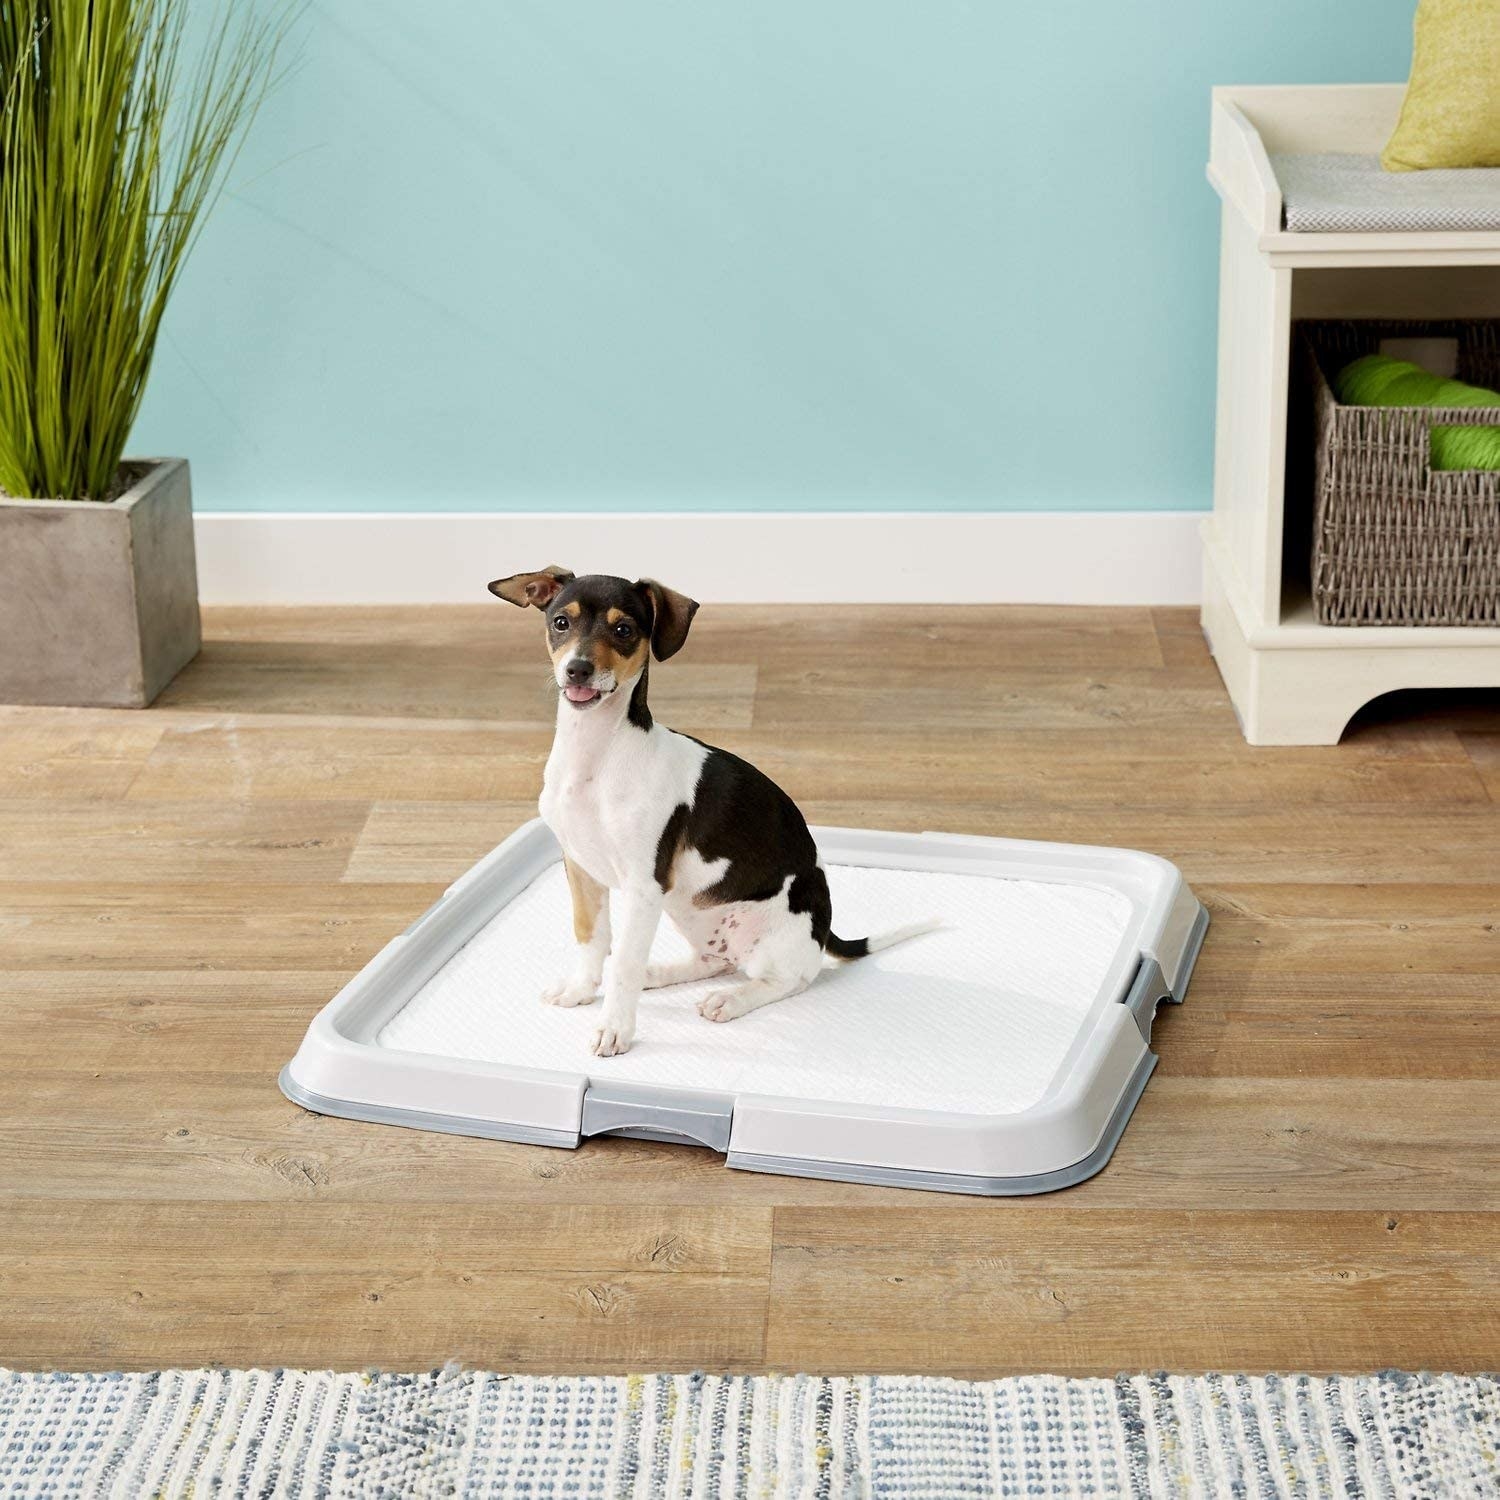 A dog on a training pad on the holder